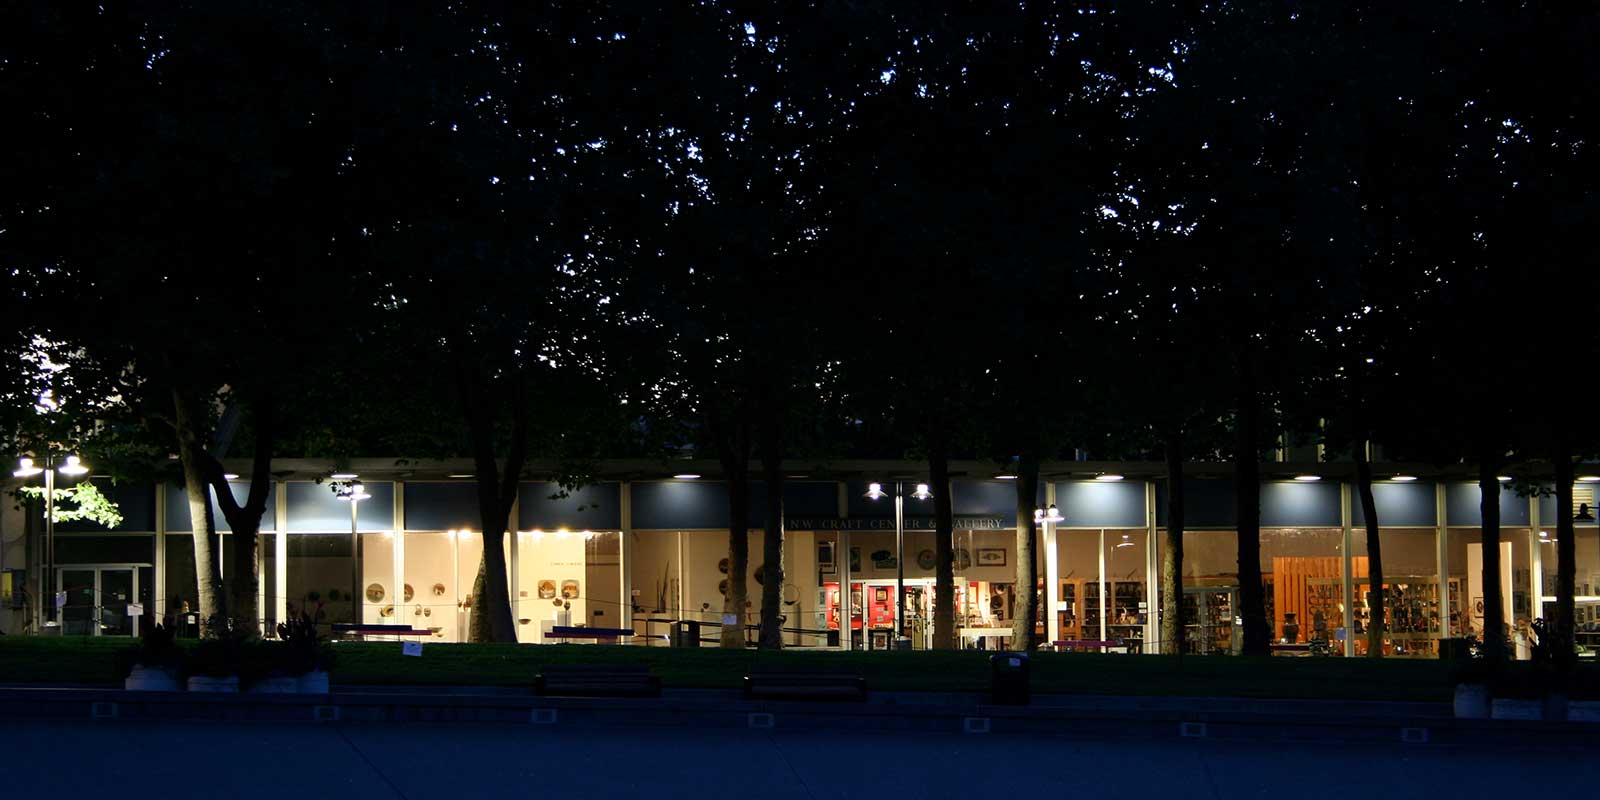 A dimly lit row of windows under trees showing artwork at Seattle Center.